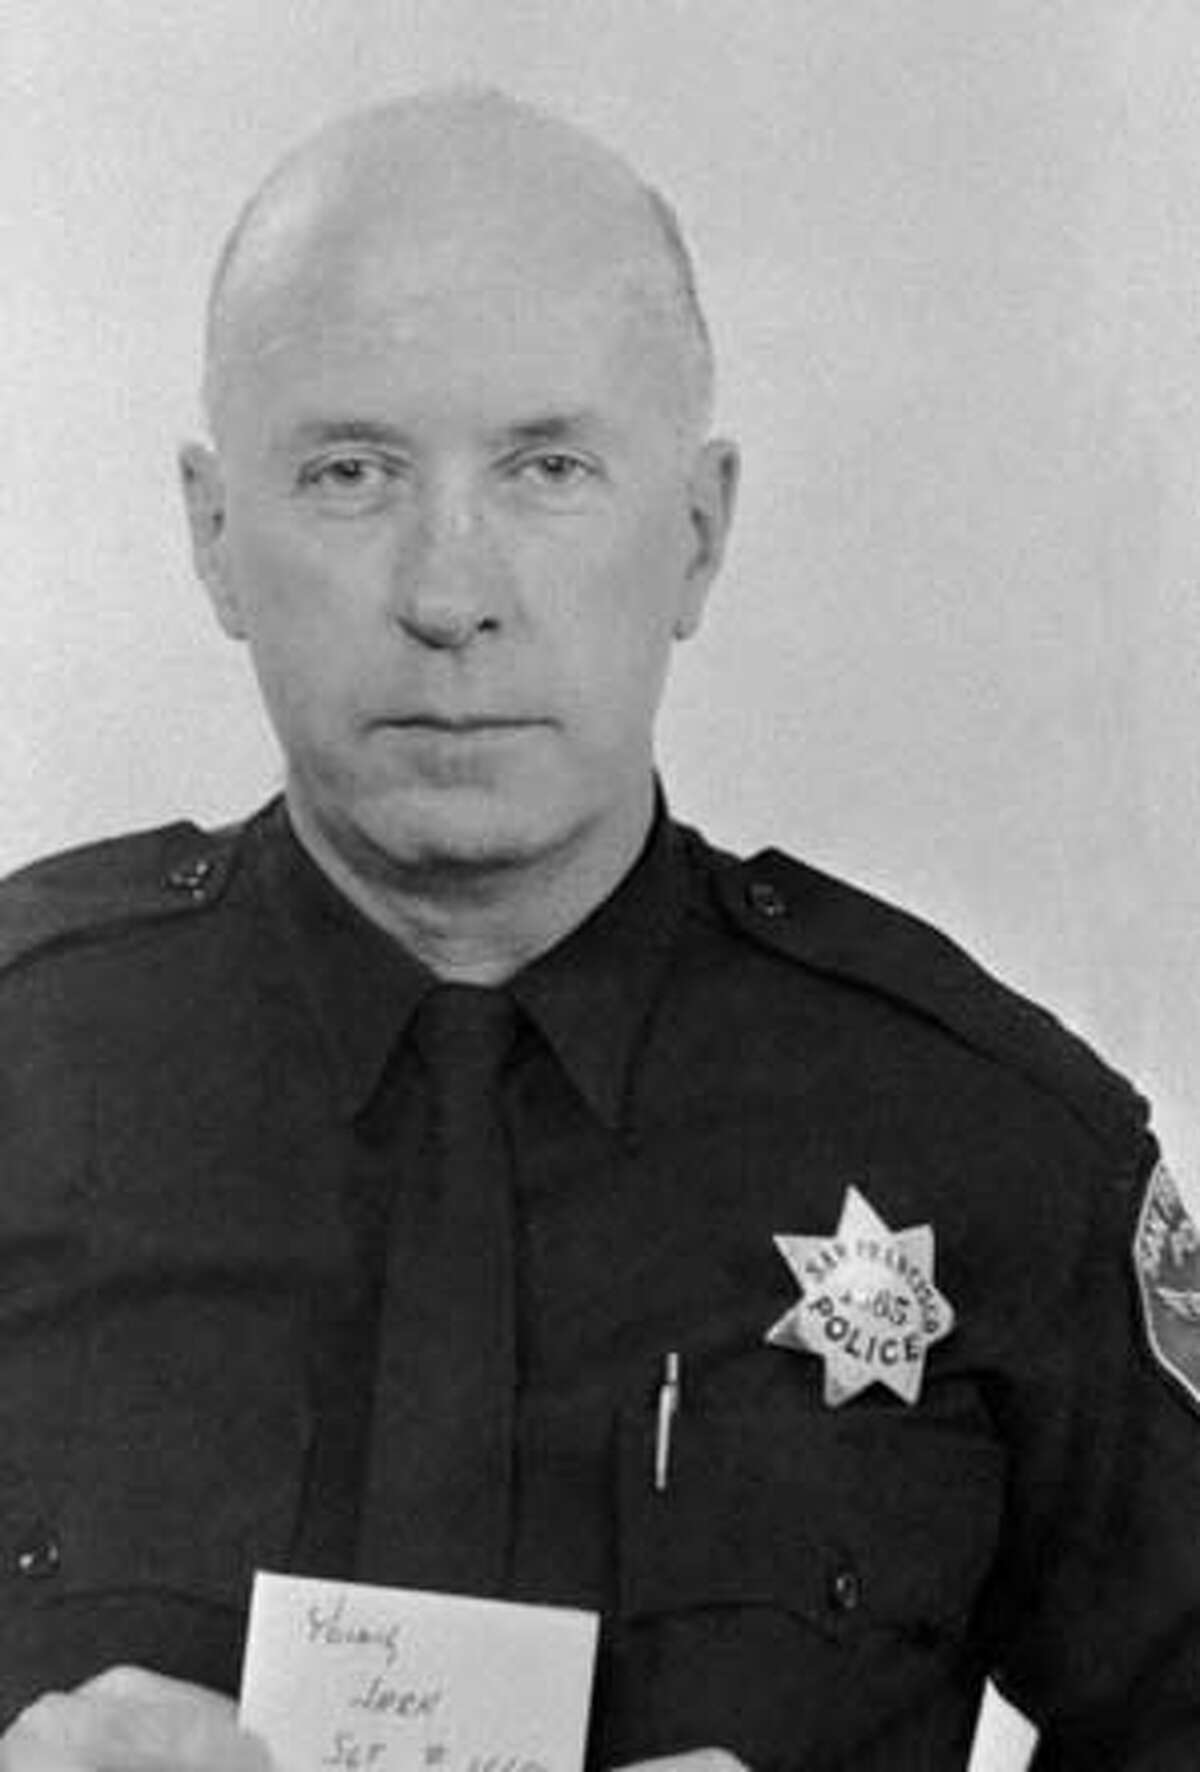 ** UPDATES CAPTION INFORMATION TO EIGHT PEOPLE ARRESTED - FILE ** Sgt. John V. Young is shown in this 1971 San Francisco Police Department photo. Eight people were arrested Tuesday in the 1971 killing of Young, authorities said. Sgt. John V. Young, 51, was killed in an attack on a police station, which also injured a civilian clerk. Police said seven of the eight people arrested are believed to be former members of the Black Liberation Army, a violent offshoot of the Black Panther Party that was active in the Bay Area in the 1970s and early 1980s, authorities said. (AP Photo/San Francisco Police Department) Ran on: 01-24-2007 Francisco Torres (above, center) is escorted by police in New York. He is among eight men charged with Youngs murder; a ninth is charged with conspiracy to murder police officers. Ran on: 01-24-2007 Ran on: 01-24-2007 Francisco Torres (above, center) is escorted by police in New York. He is among eight men charged with Youngs slaying; a ninth is charged with conspiracy to murder police officers. ALSO Ran on: 01-26-2007 Francisco Torres is a suspect because of a fingerprint match. 1971 AP FILE PHOTO.